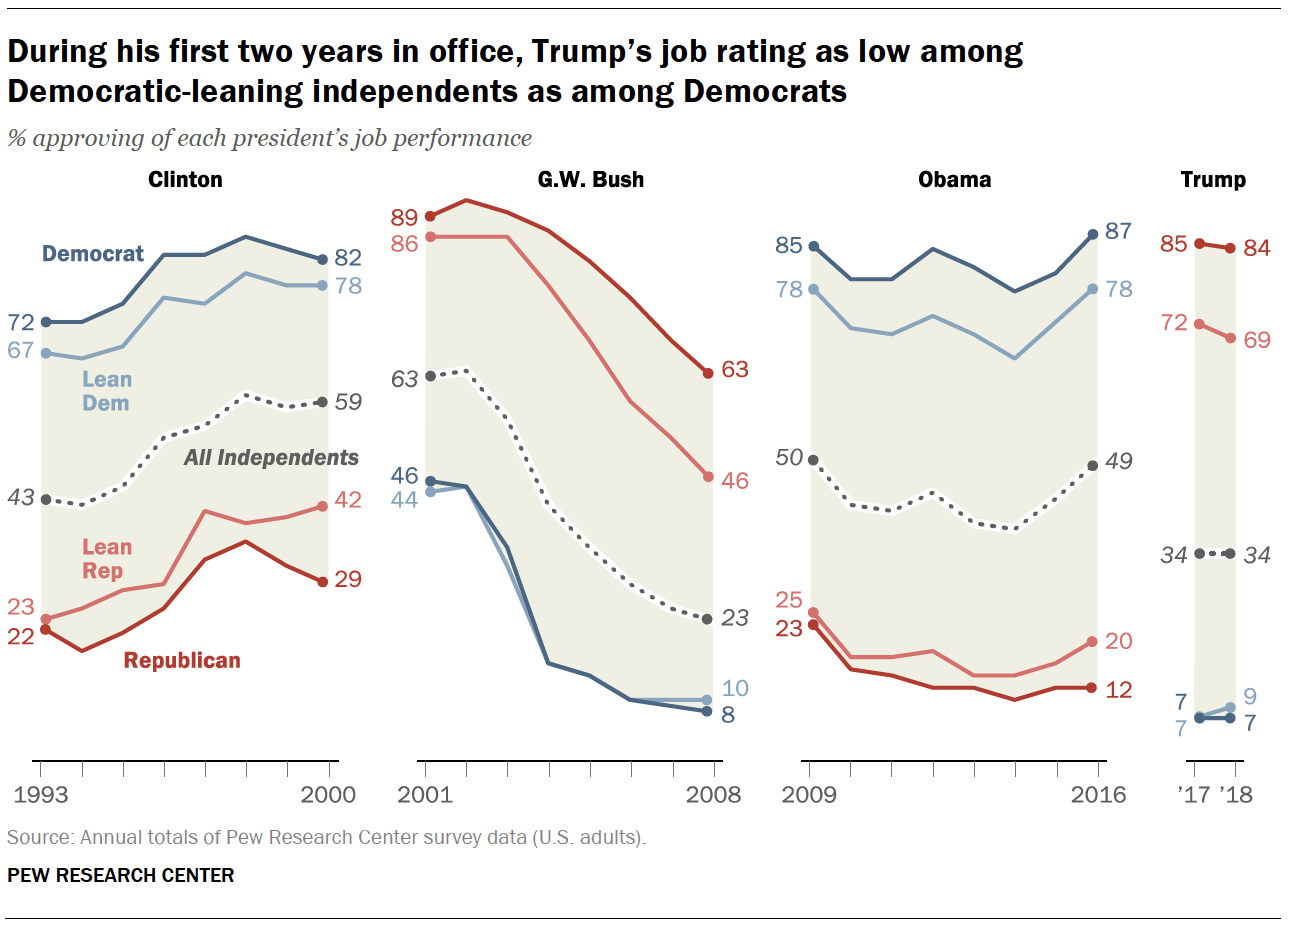 During his first two years in office, Trump’s job rating as low among Democratic-leaning independents as among Democrats